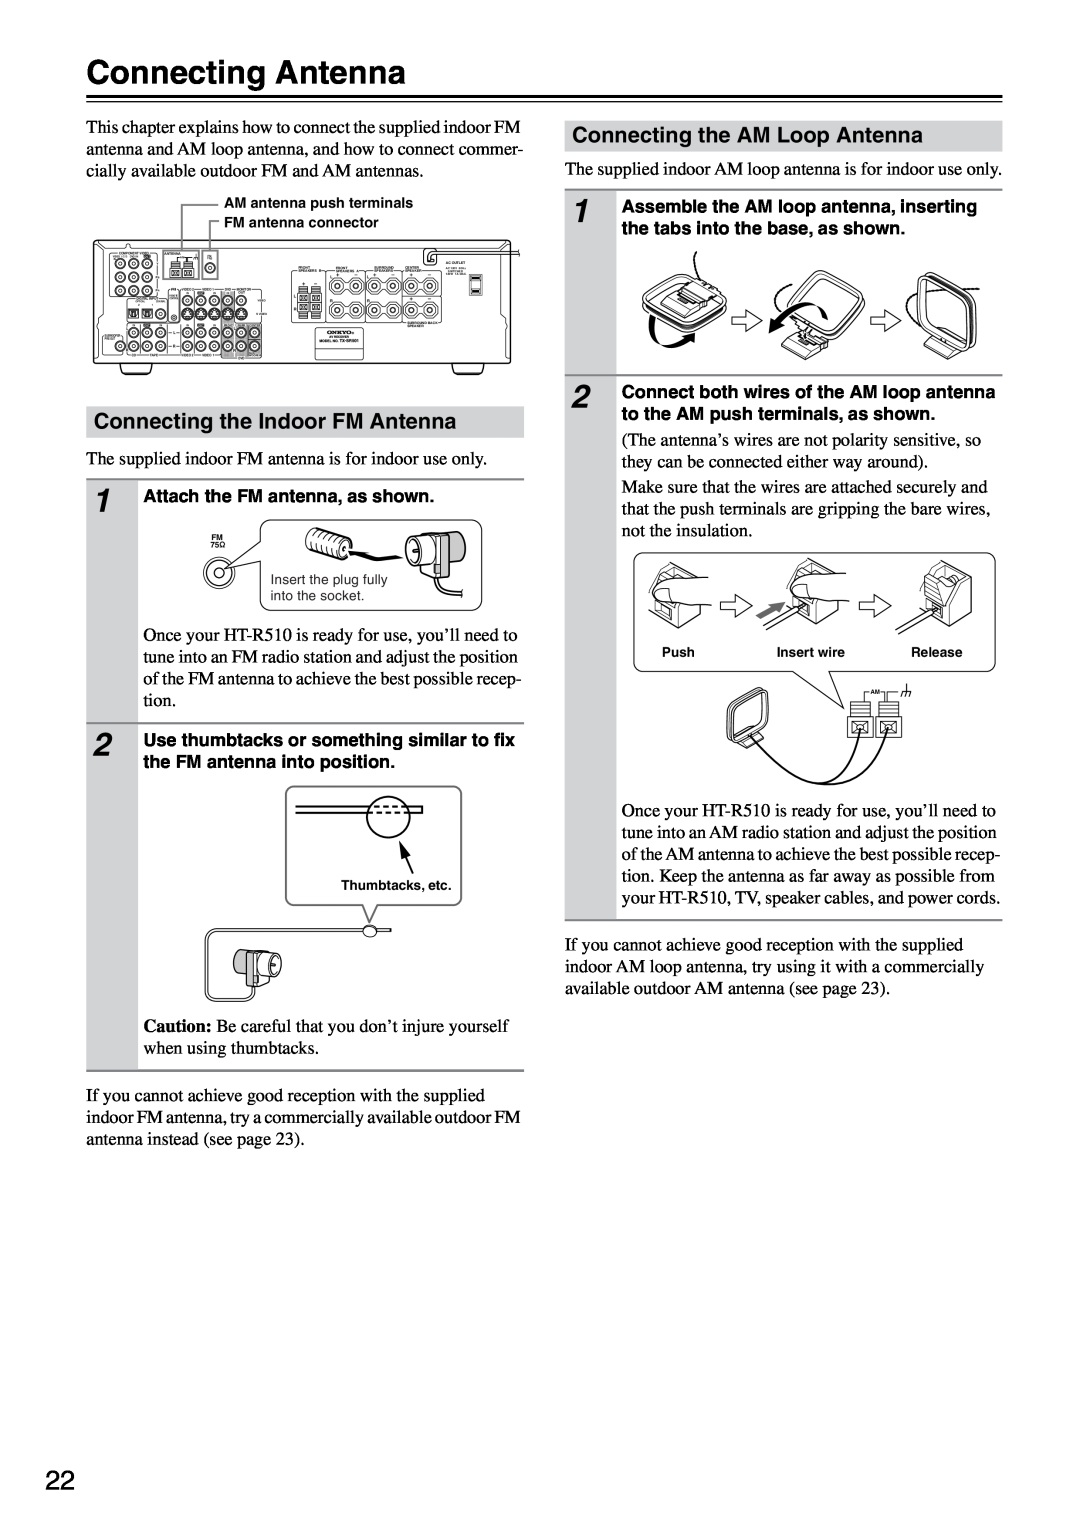 Onkyo HT-R510 instruction manual Connecting Antenna, Connecting the Indoor FM Antenna, Connecting the AM Loop Antenna 